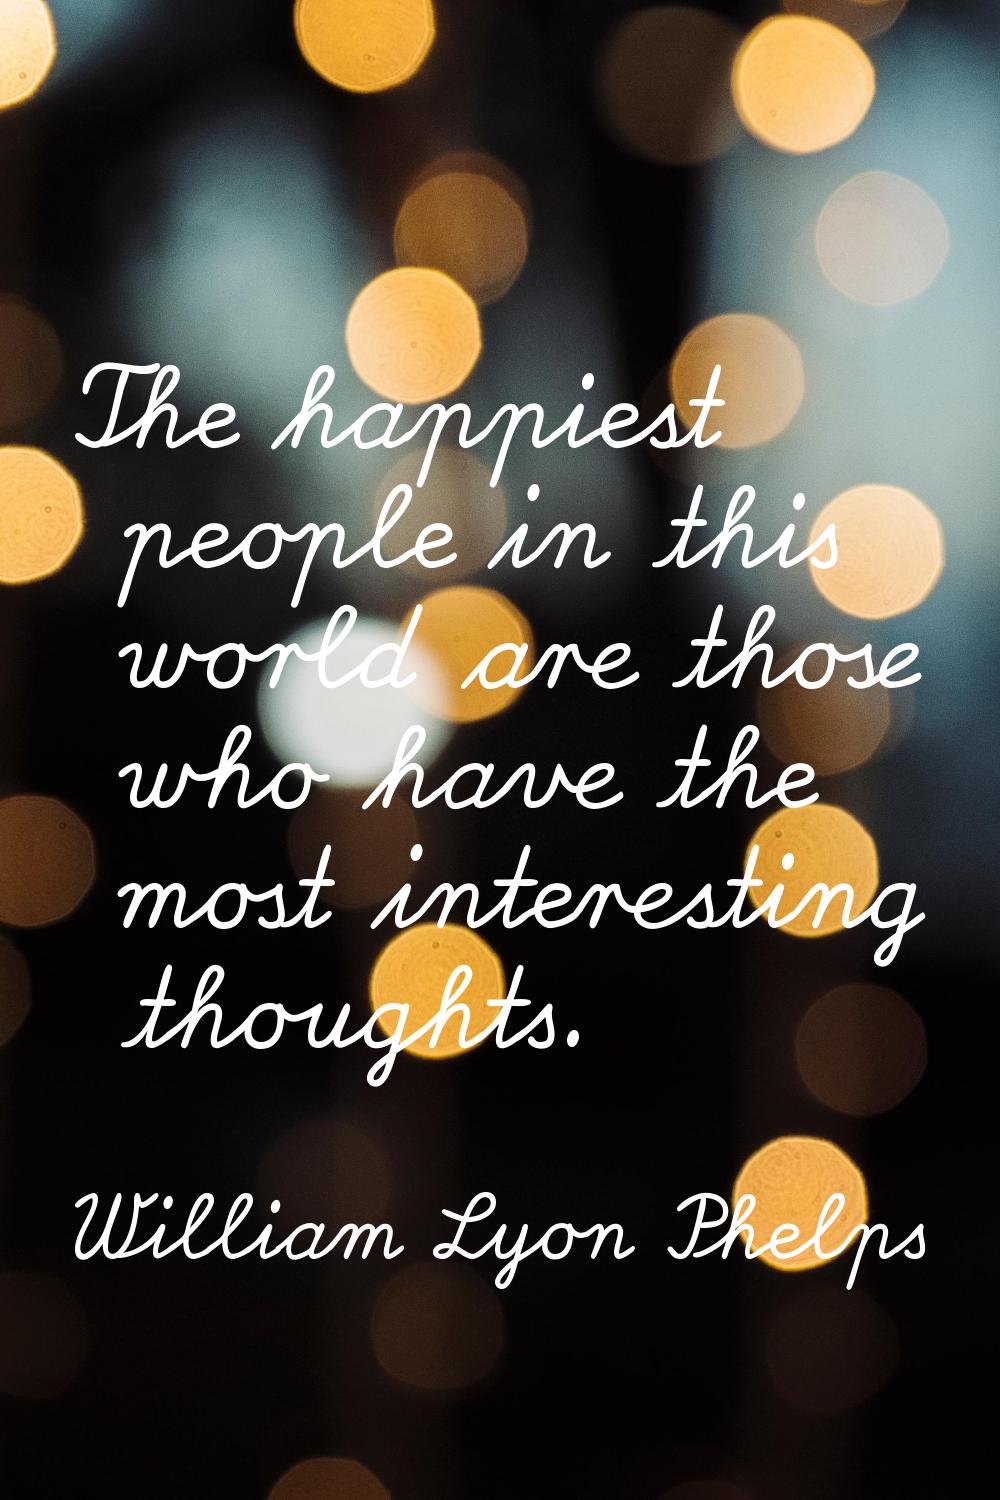 The happiest people in this world are those who have the most interesting thoughts.